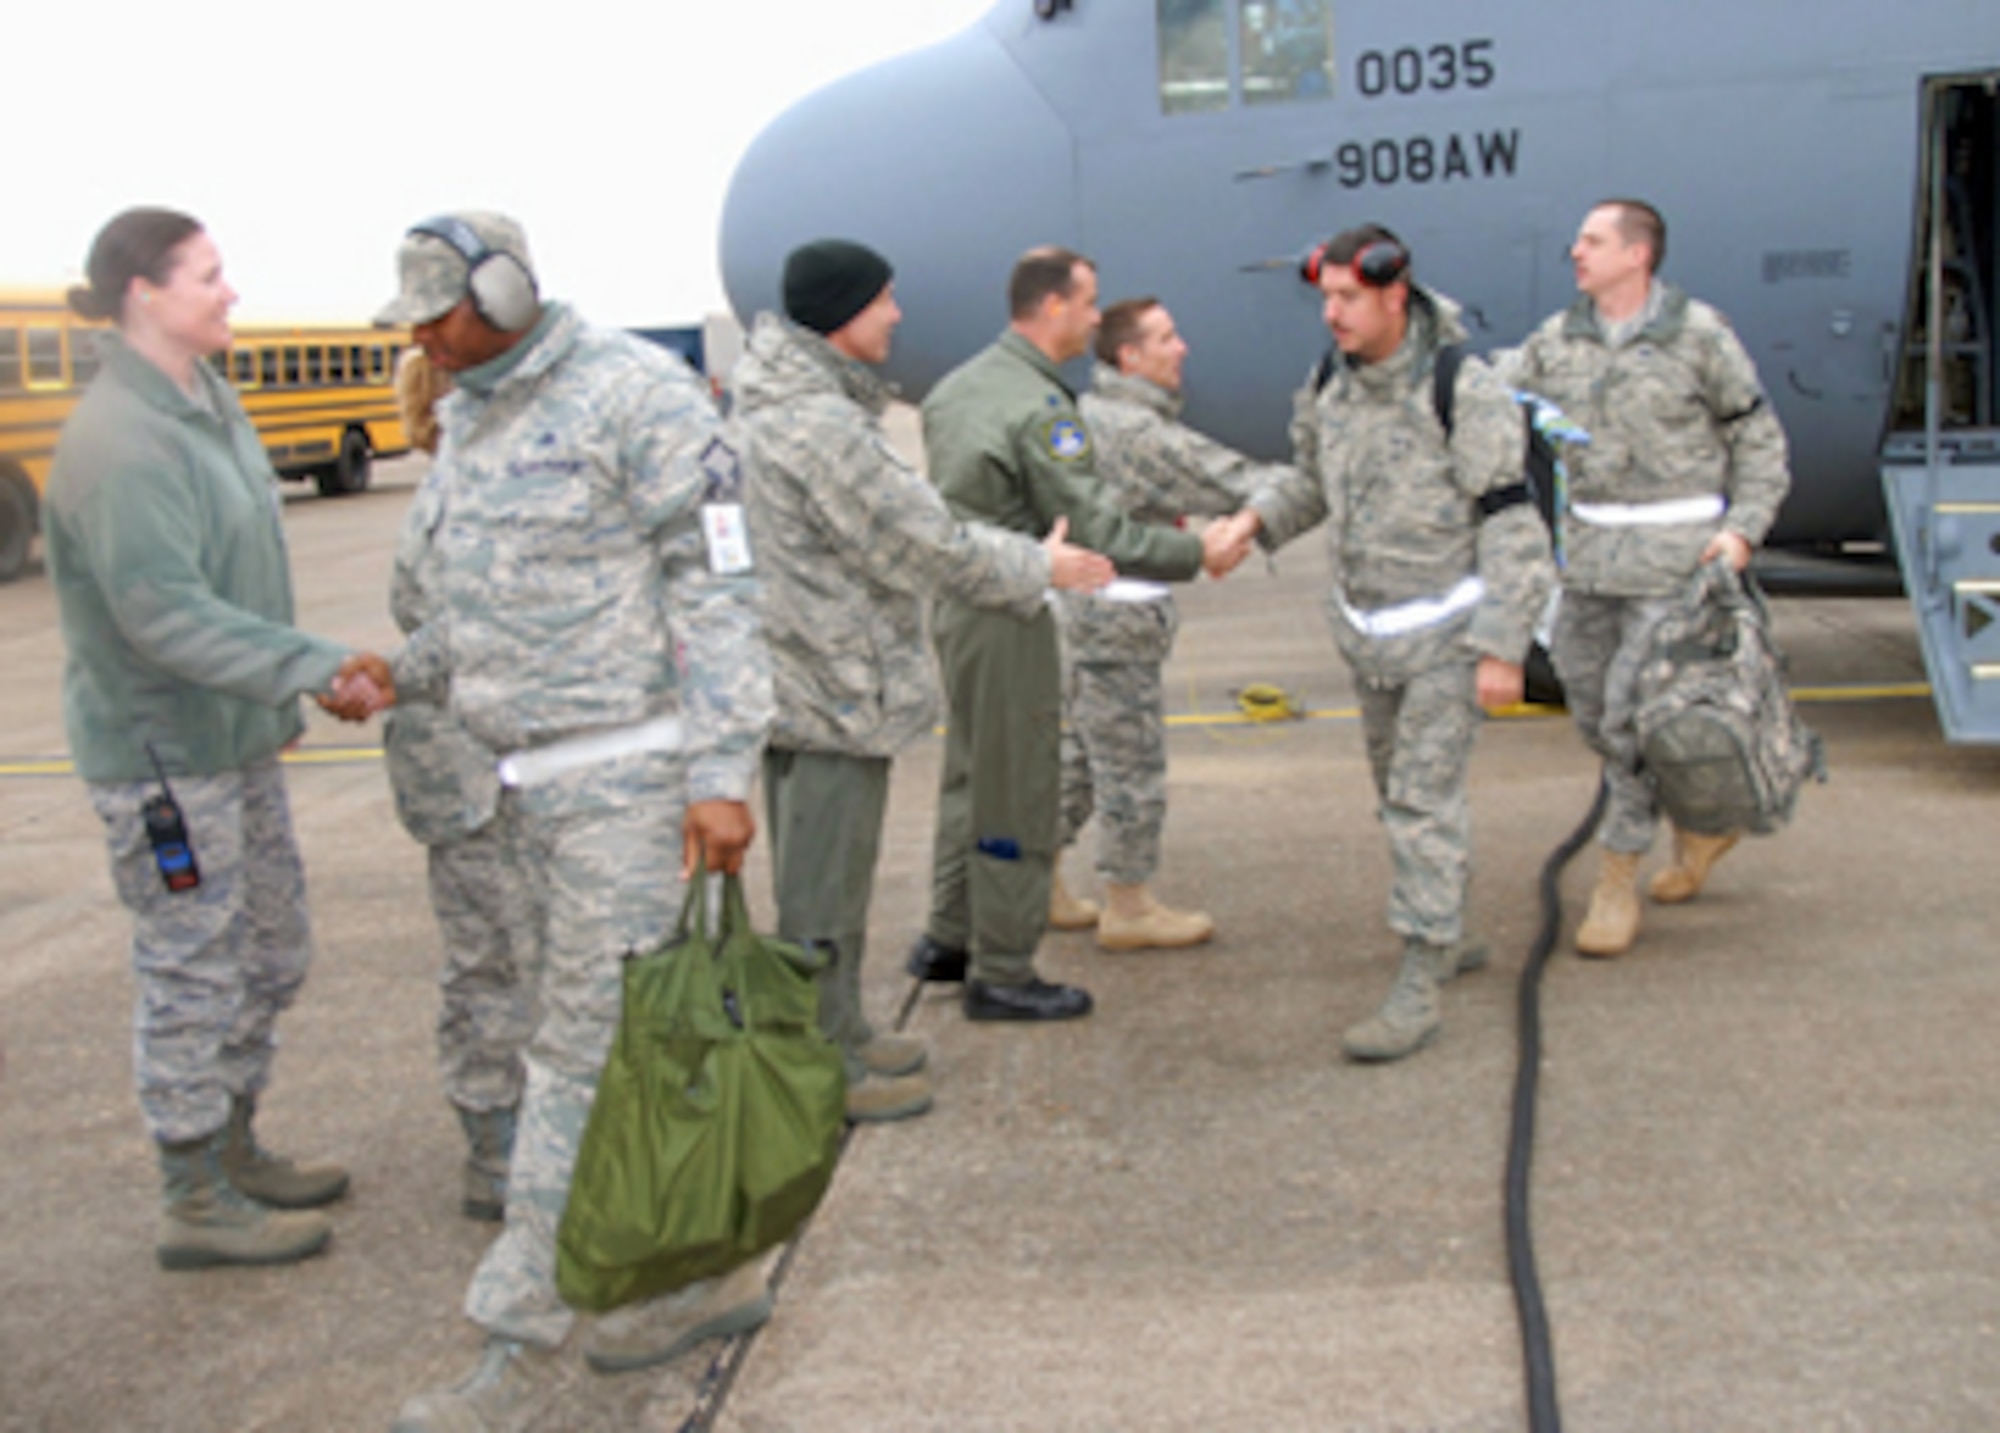 Members of the 908th Airlift Wing are greeted by, from left, Major Madalyn Marlatt, commander of the 908th Aircraft Maintenance Squadron; Lt. Colonel Scott Hayes, commander of the 357th Airlift Squaron; Lt. Colonel Craig Drescher, commander of the 908th Operations Support Flight; and Colonel Rob Shepherd, wing vice commander, as they disembark a C-130H aircraft after returning from the unit's Operational Readiness Inspection in Gulfport, Miss. After carefully observing the wing's ability to deploy, sustain operations and redeploy, the Air Mobility Command Inspector General's team declared the unit 'fit to fight.'